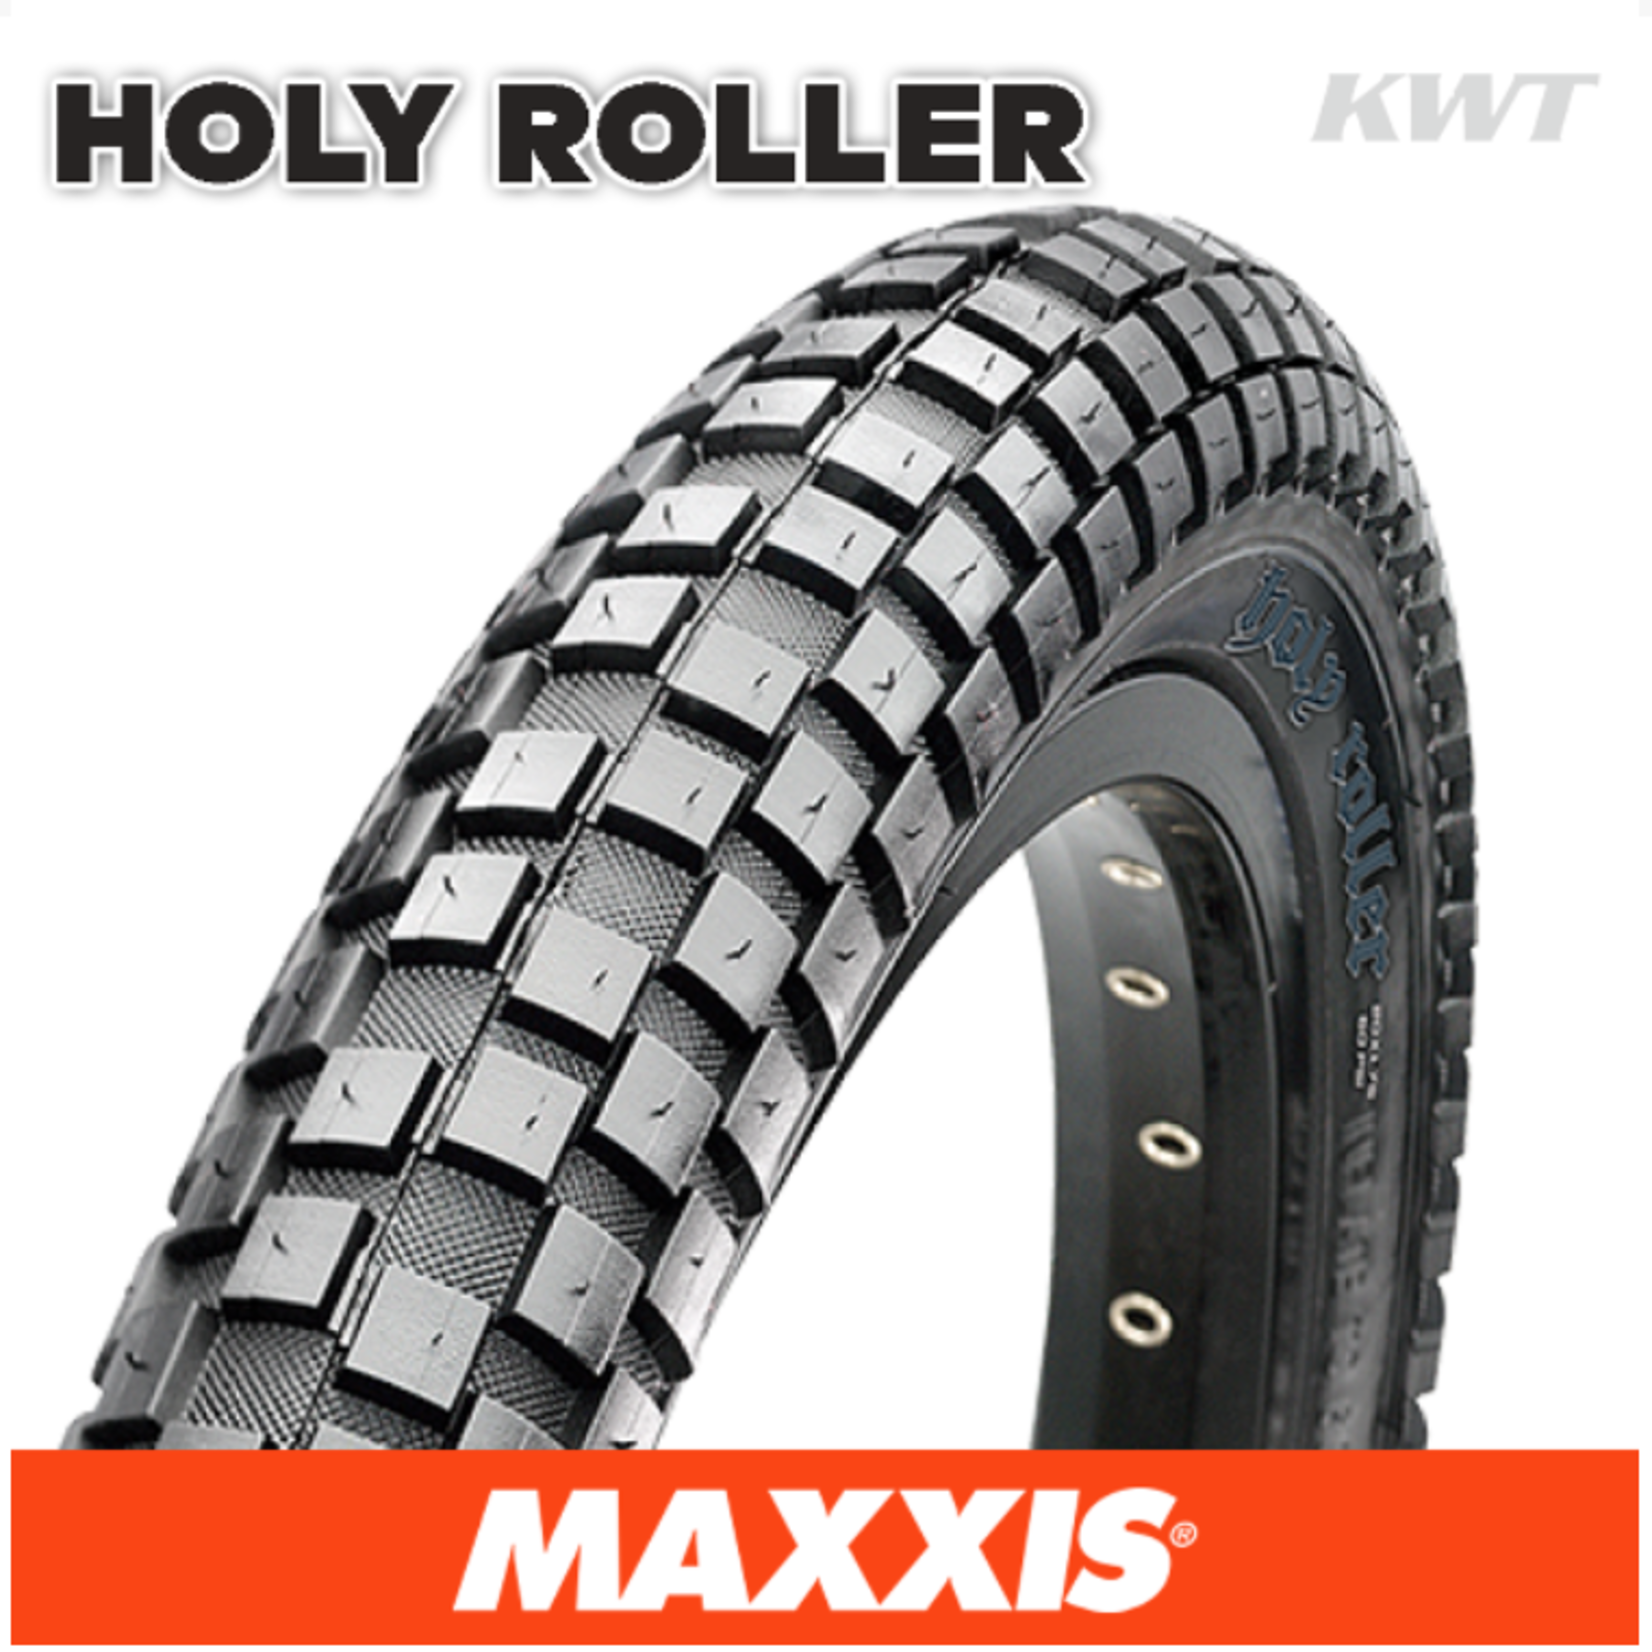 MAXXIS HOLY ROLLER 20 X 2.20 70a